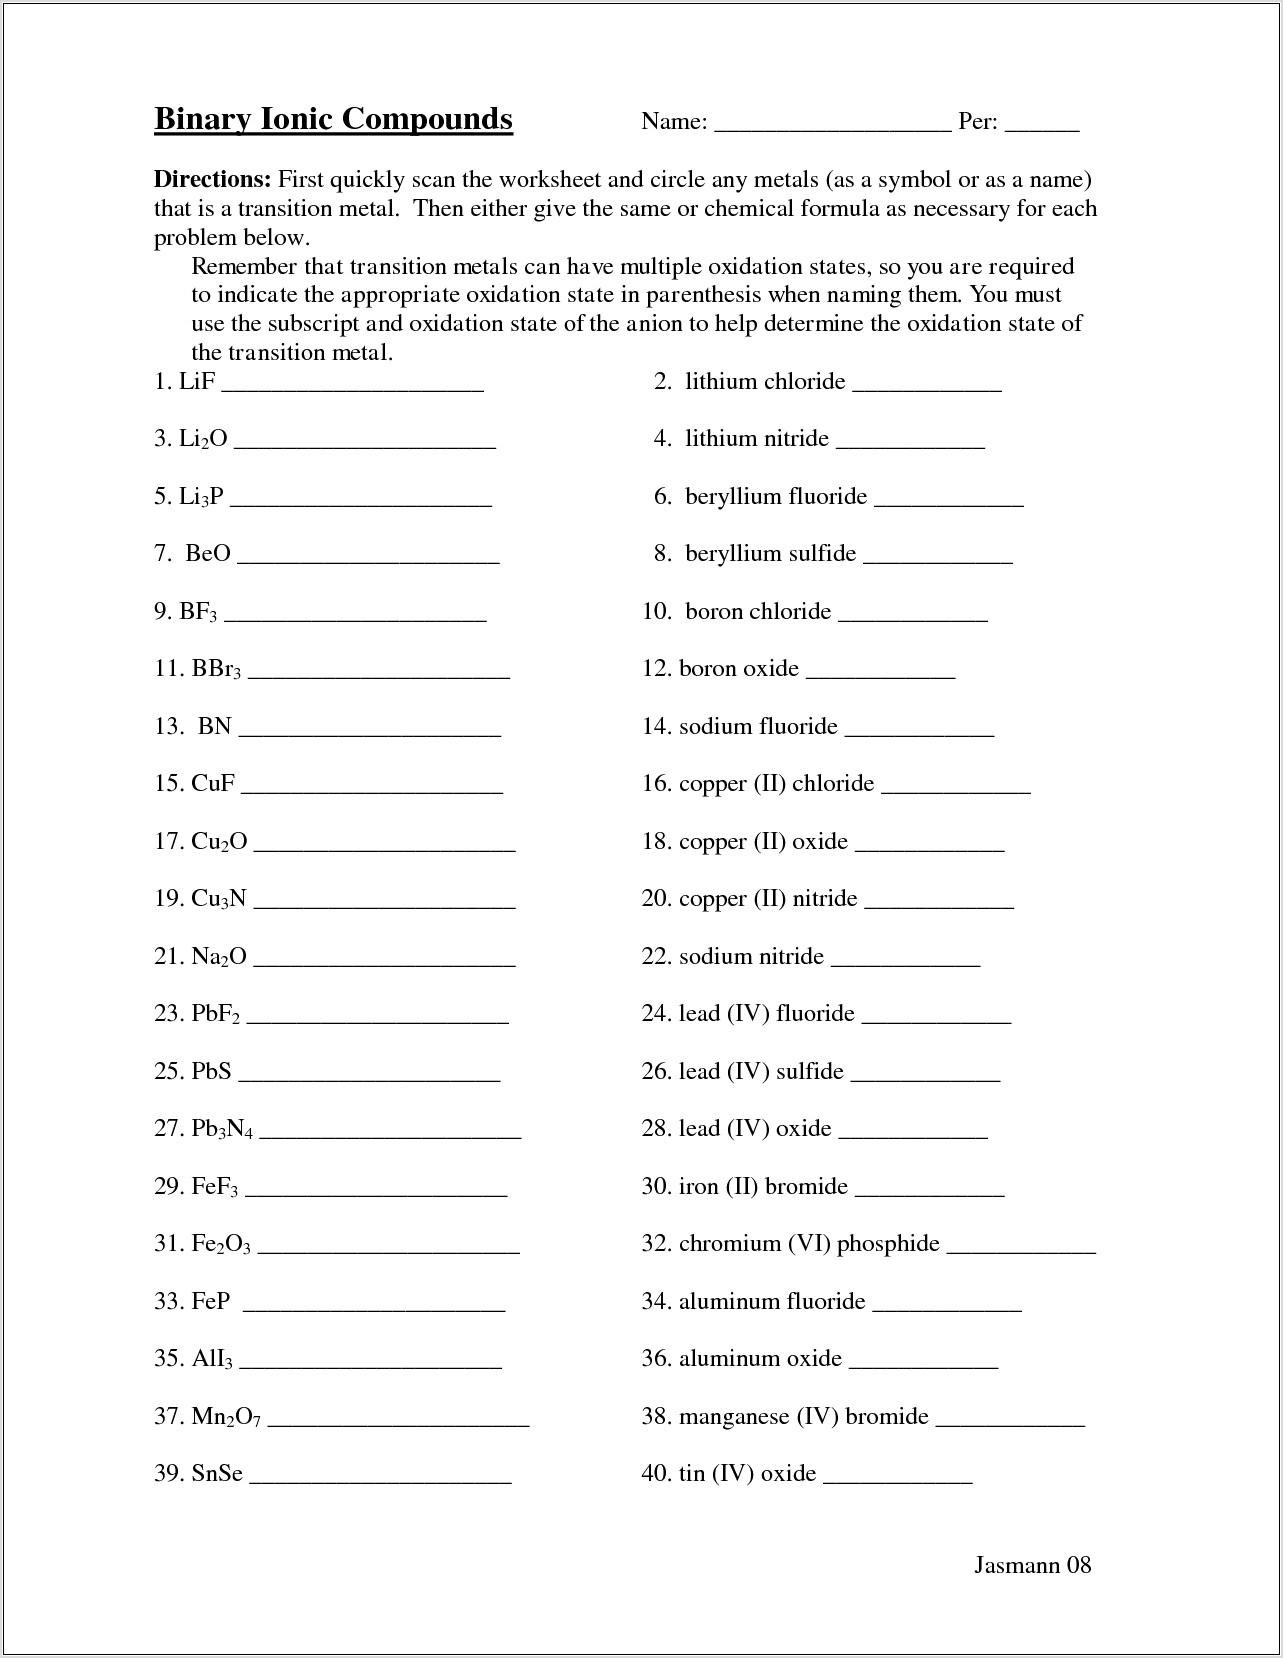 Writing Binary Ionic Compounds Worksheet